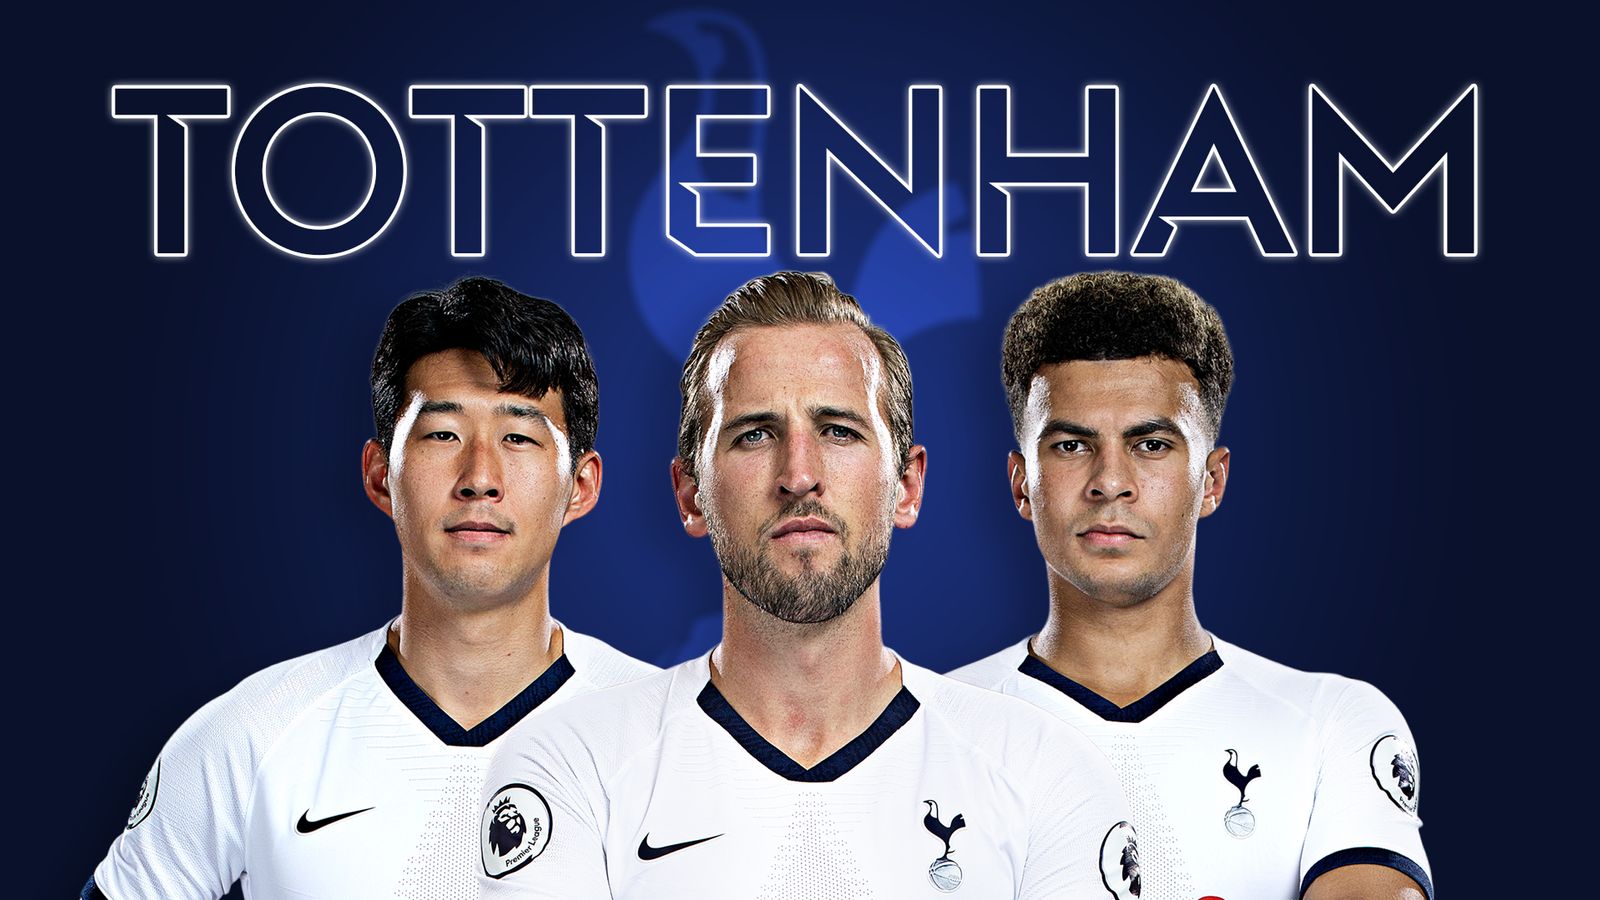 tottenham-fixtures-2021-it-seems-that-this-year-isnt-for-tottenham